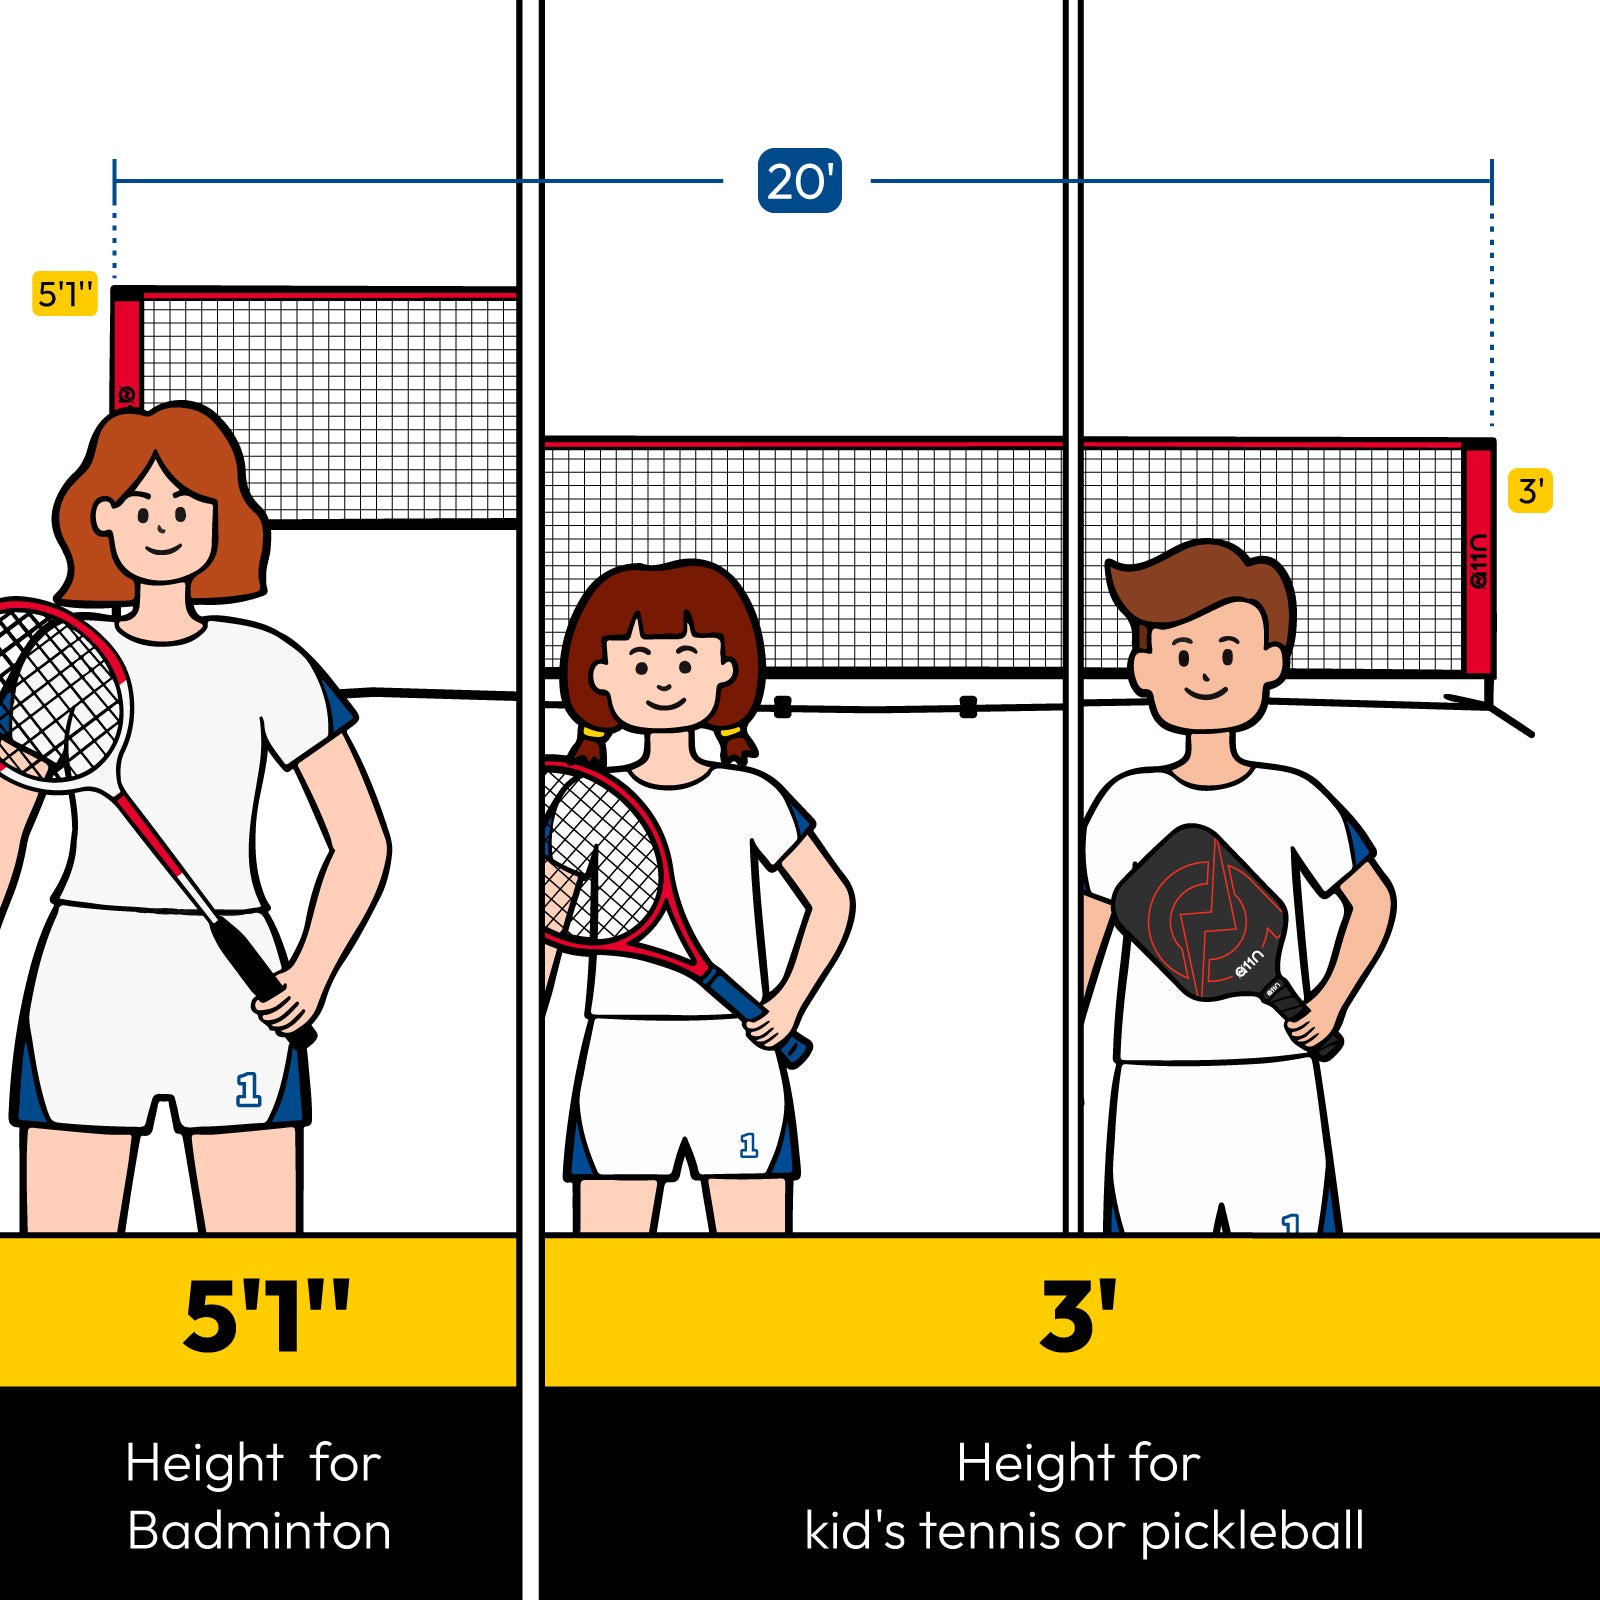 A11N Height-adjustable Portable Net